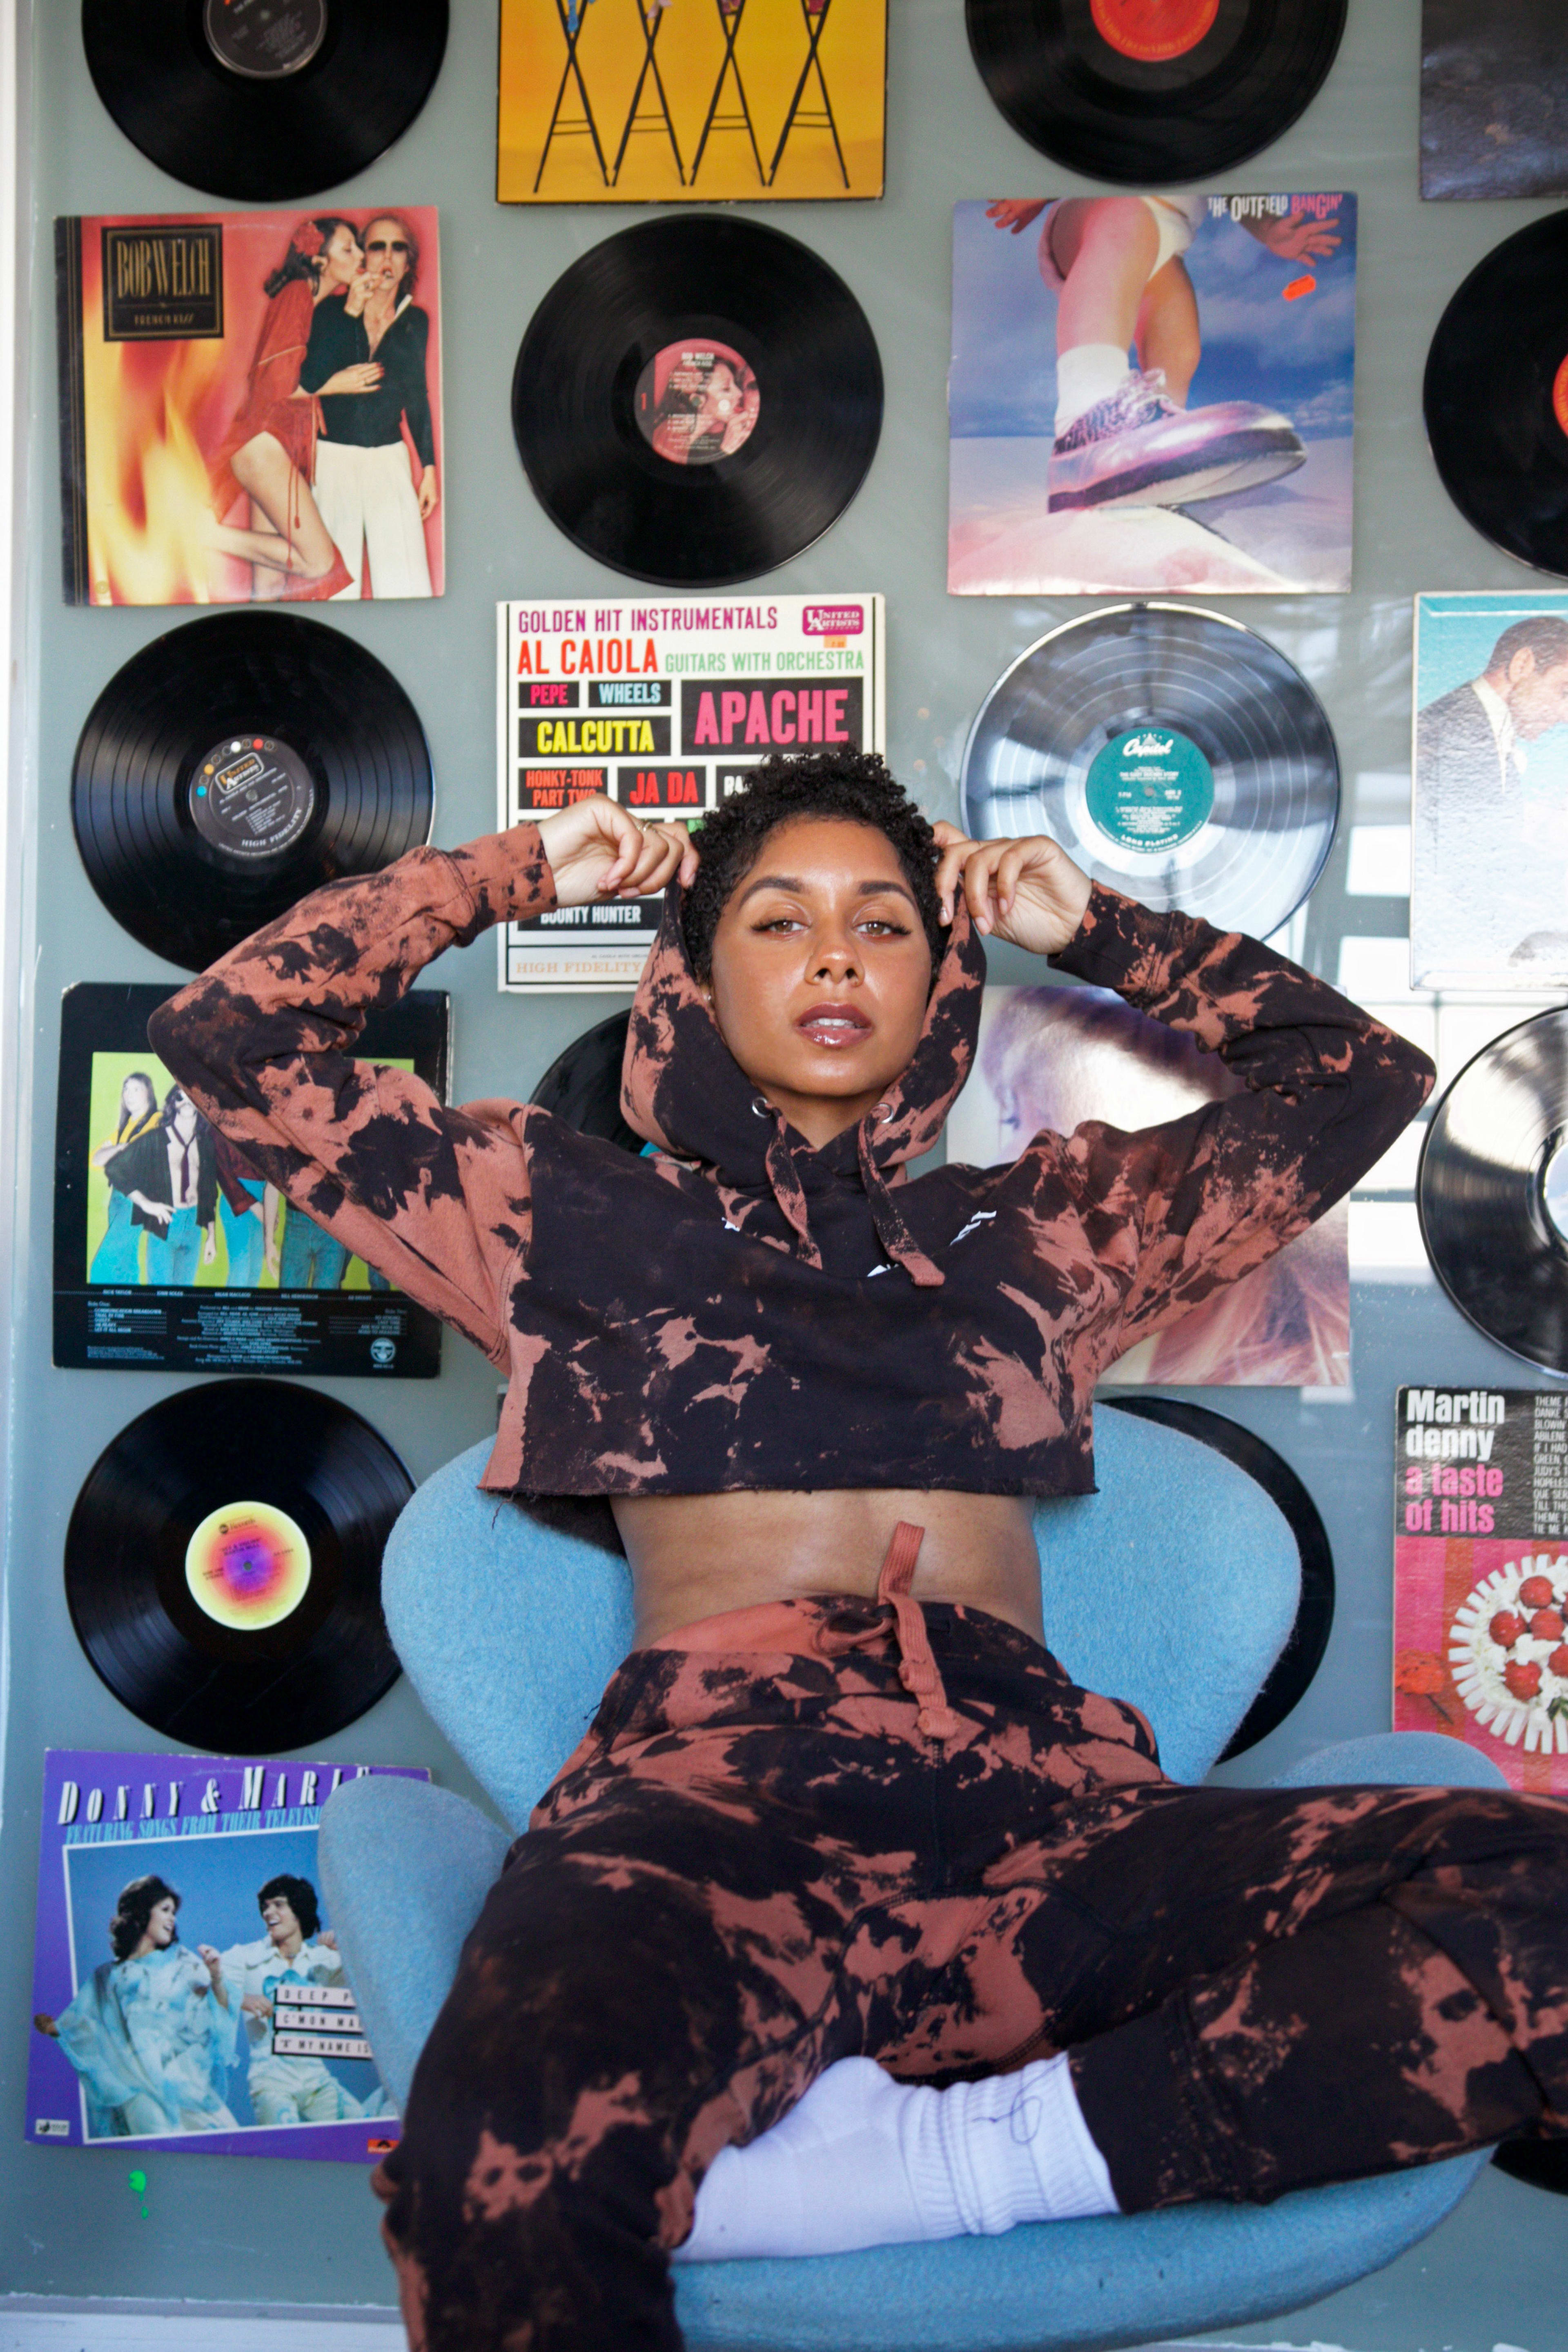 A retro photo shoot of a woman posing on a chair in front of a wall of records.